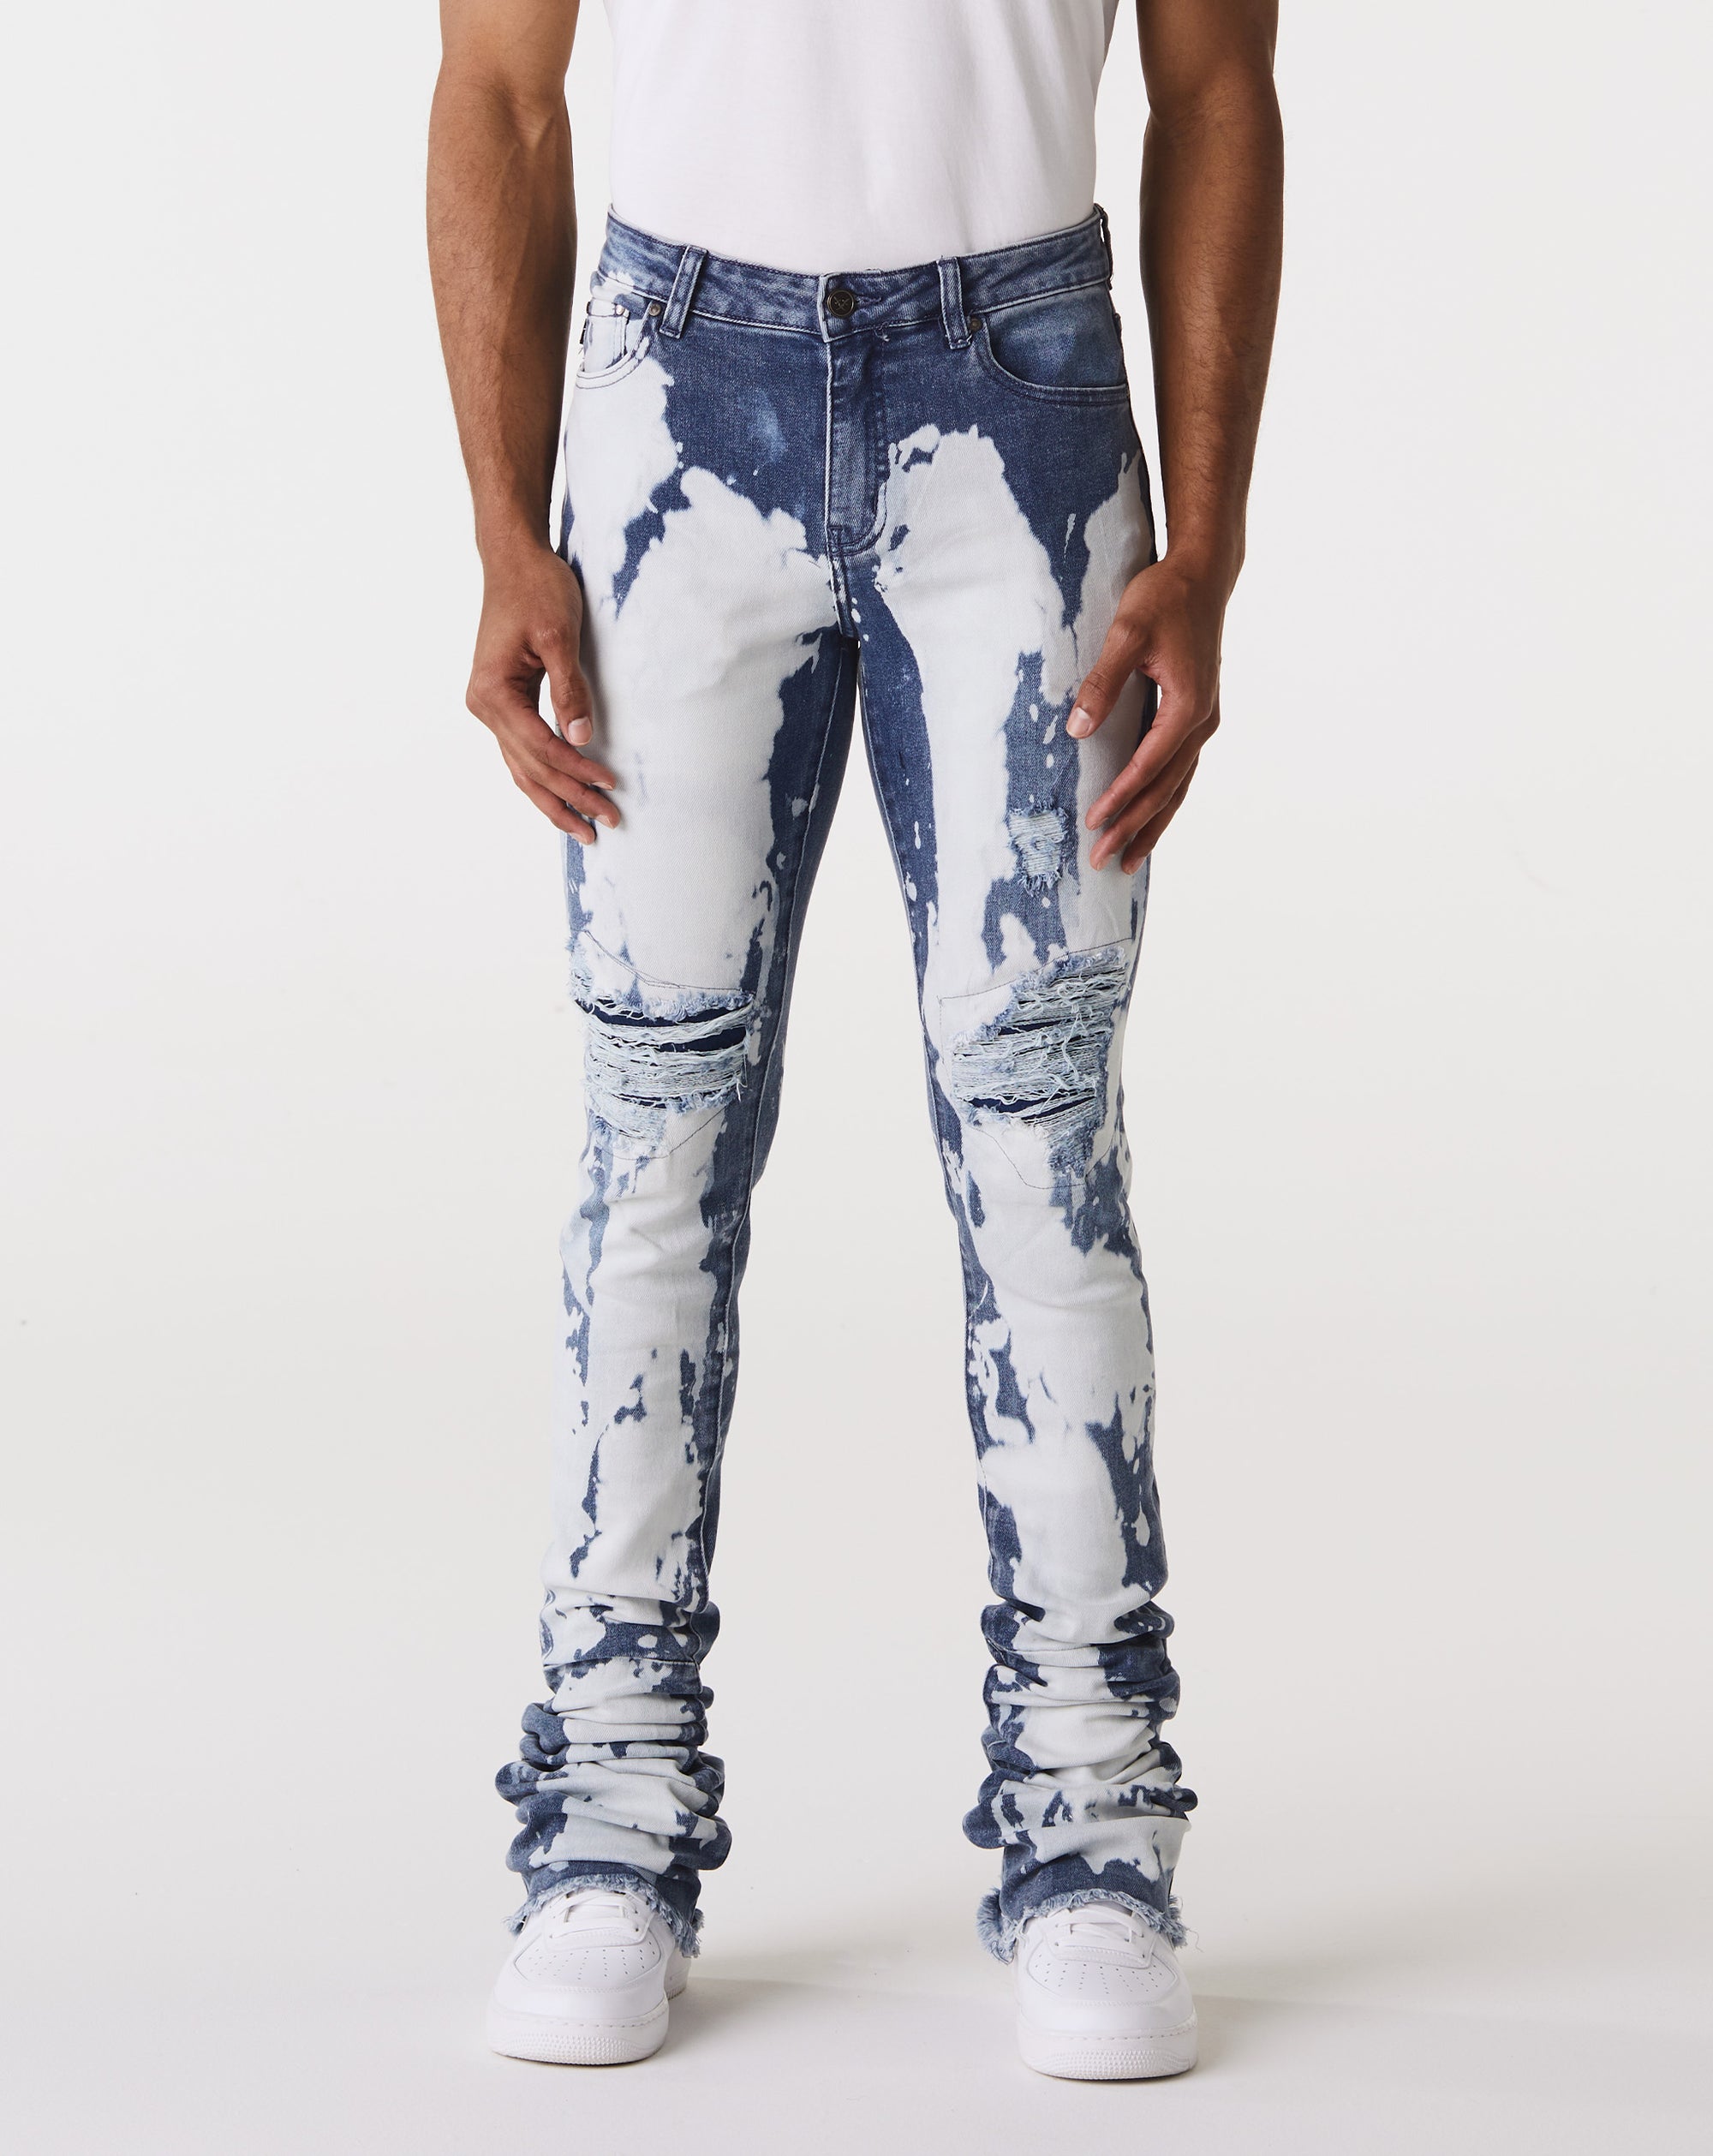 Doctrine Hendrix Stacked Jeans - Rule of Next Apparel